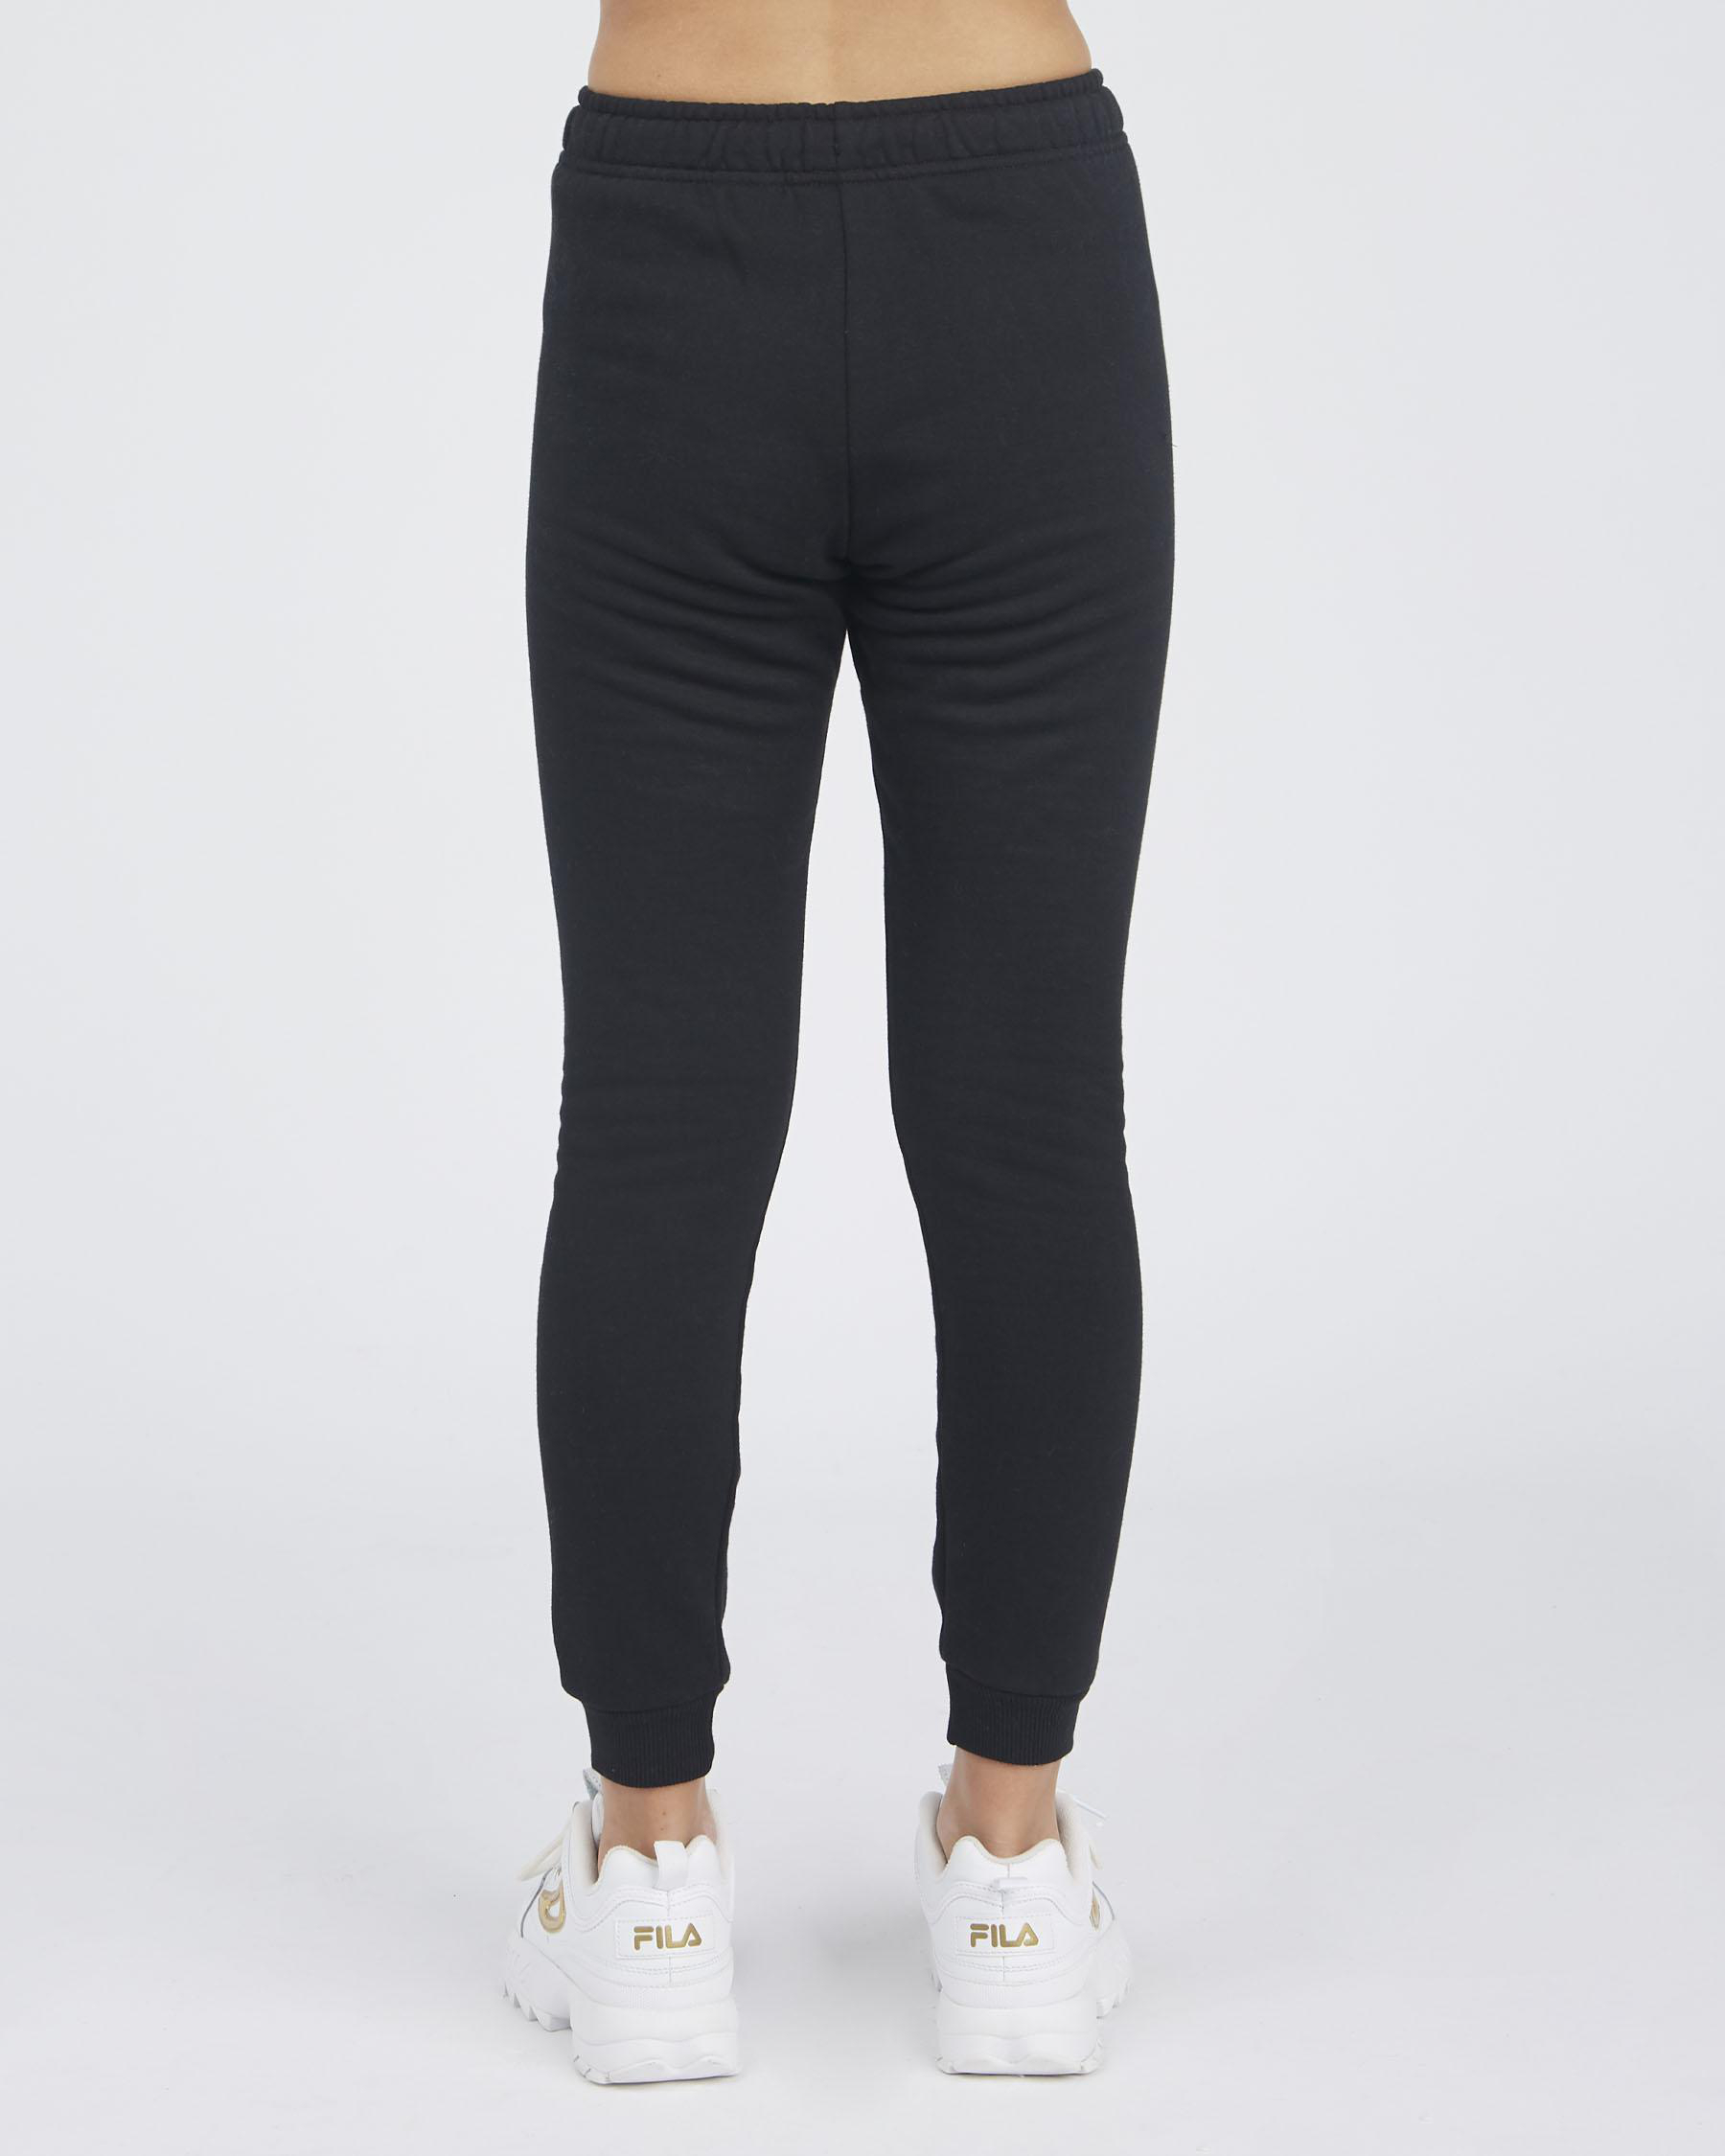 Fila Girls' Harlow Track Pants In Black - FREE* Shipping & Easy Returns -  City Beach United States